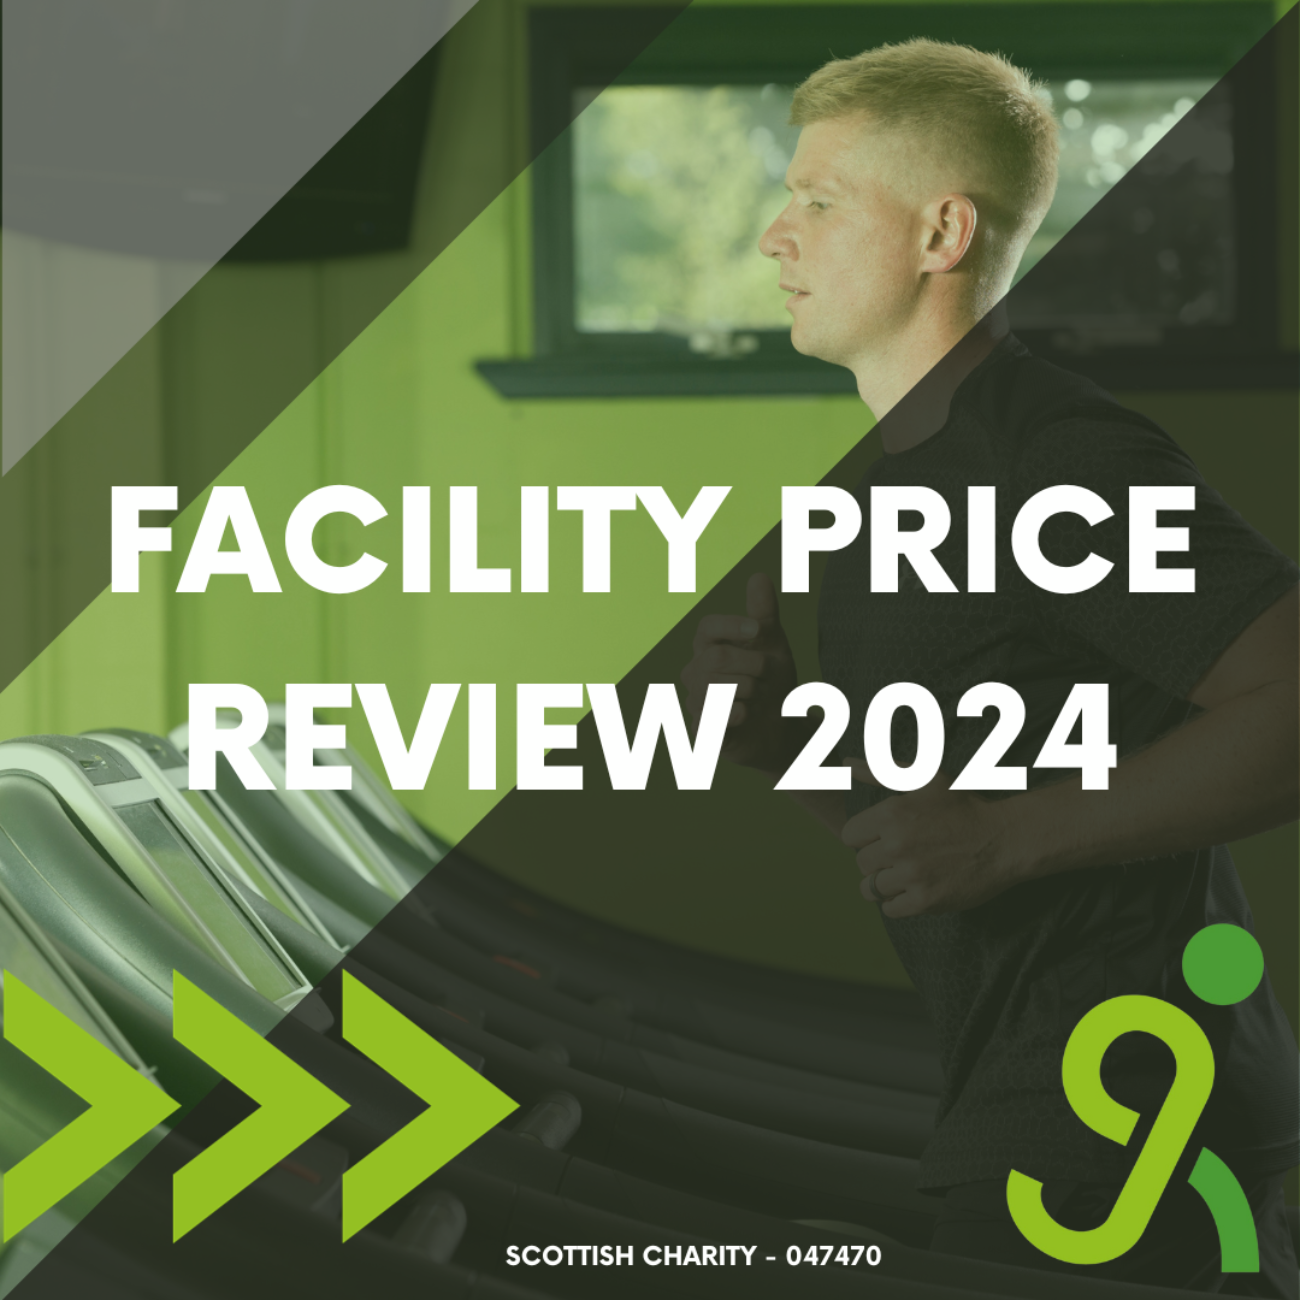 Facility Price Review 2024